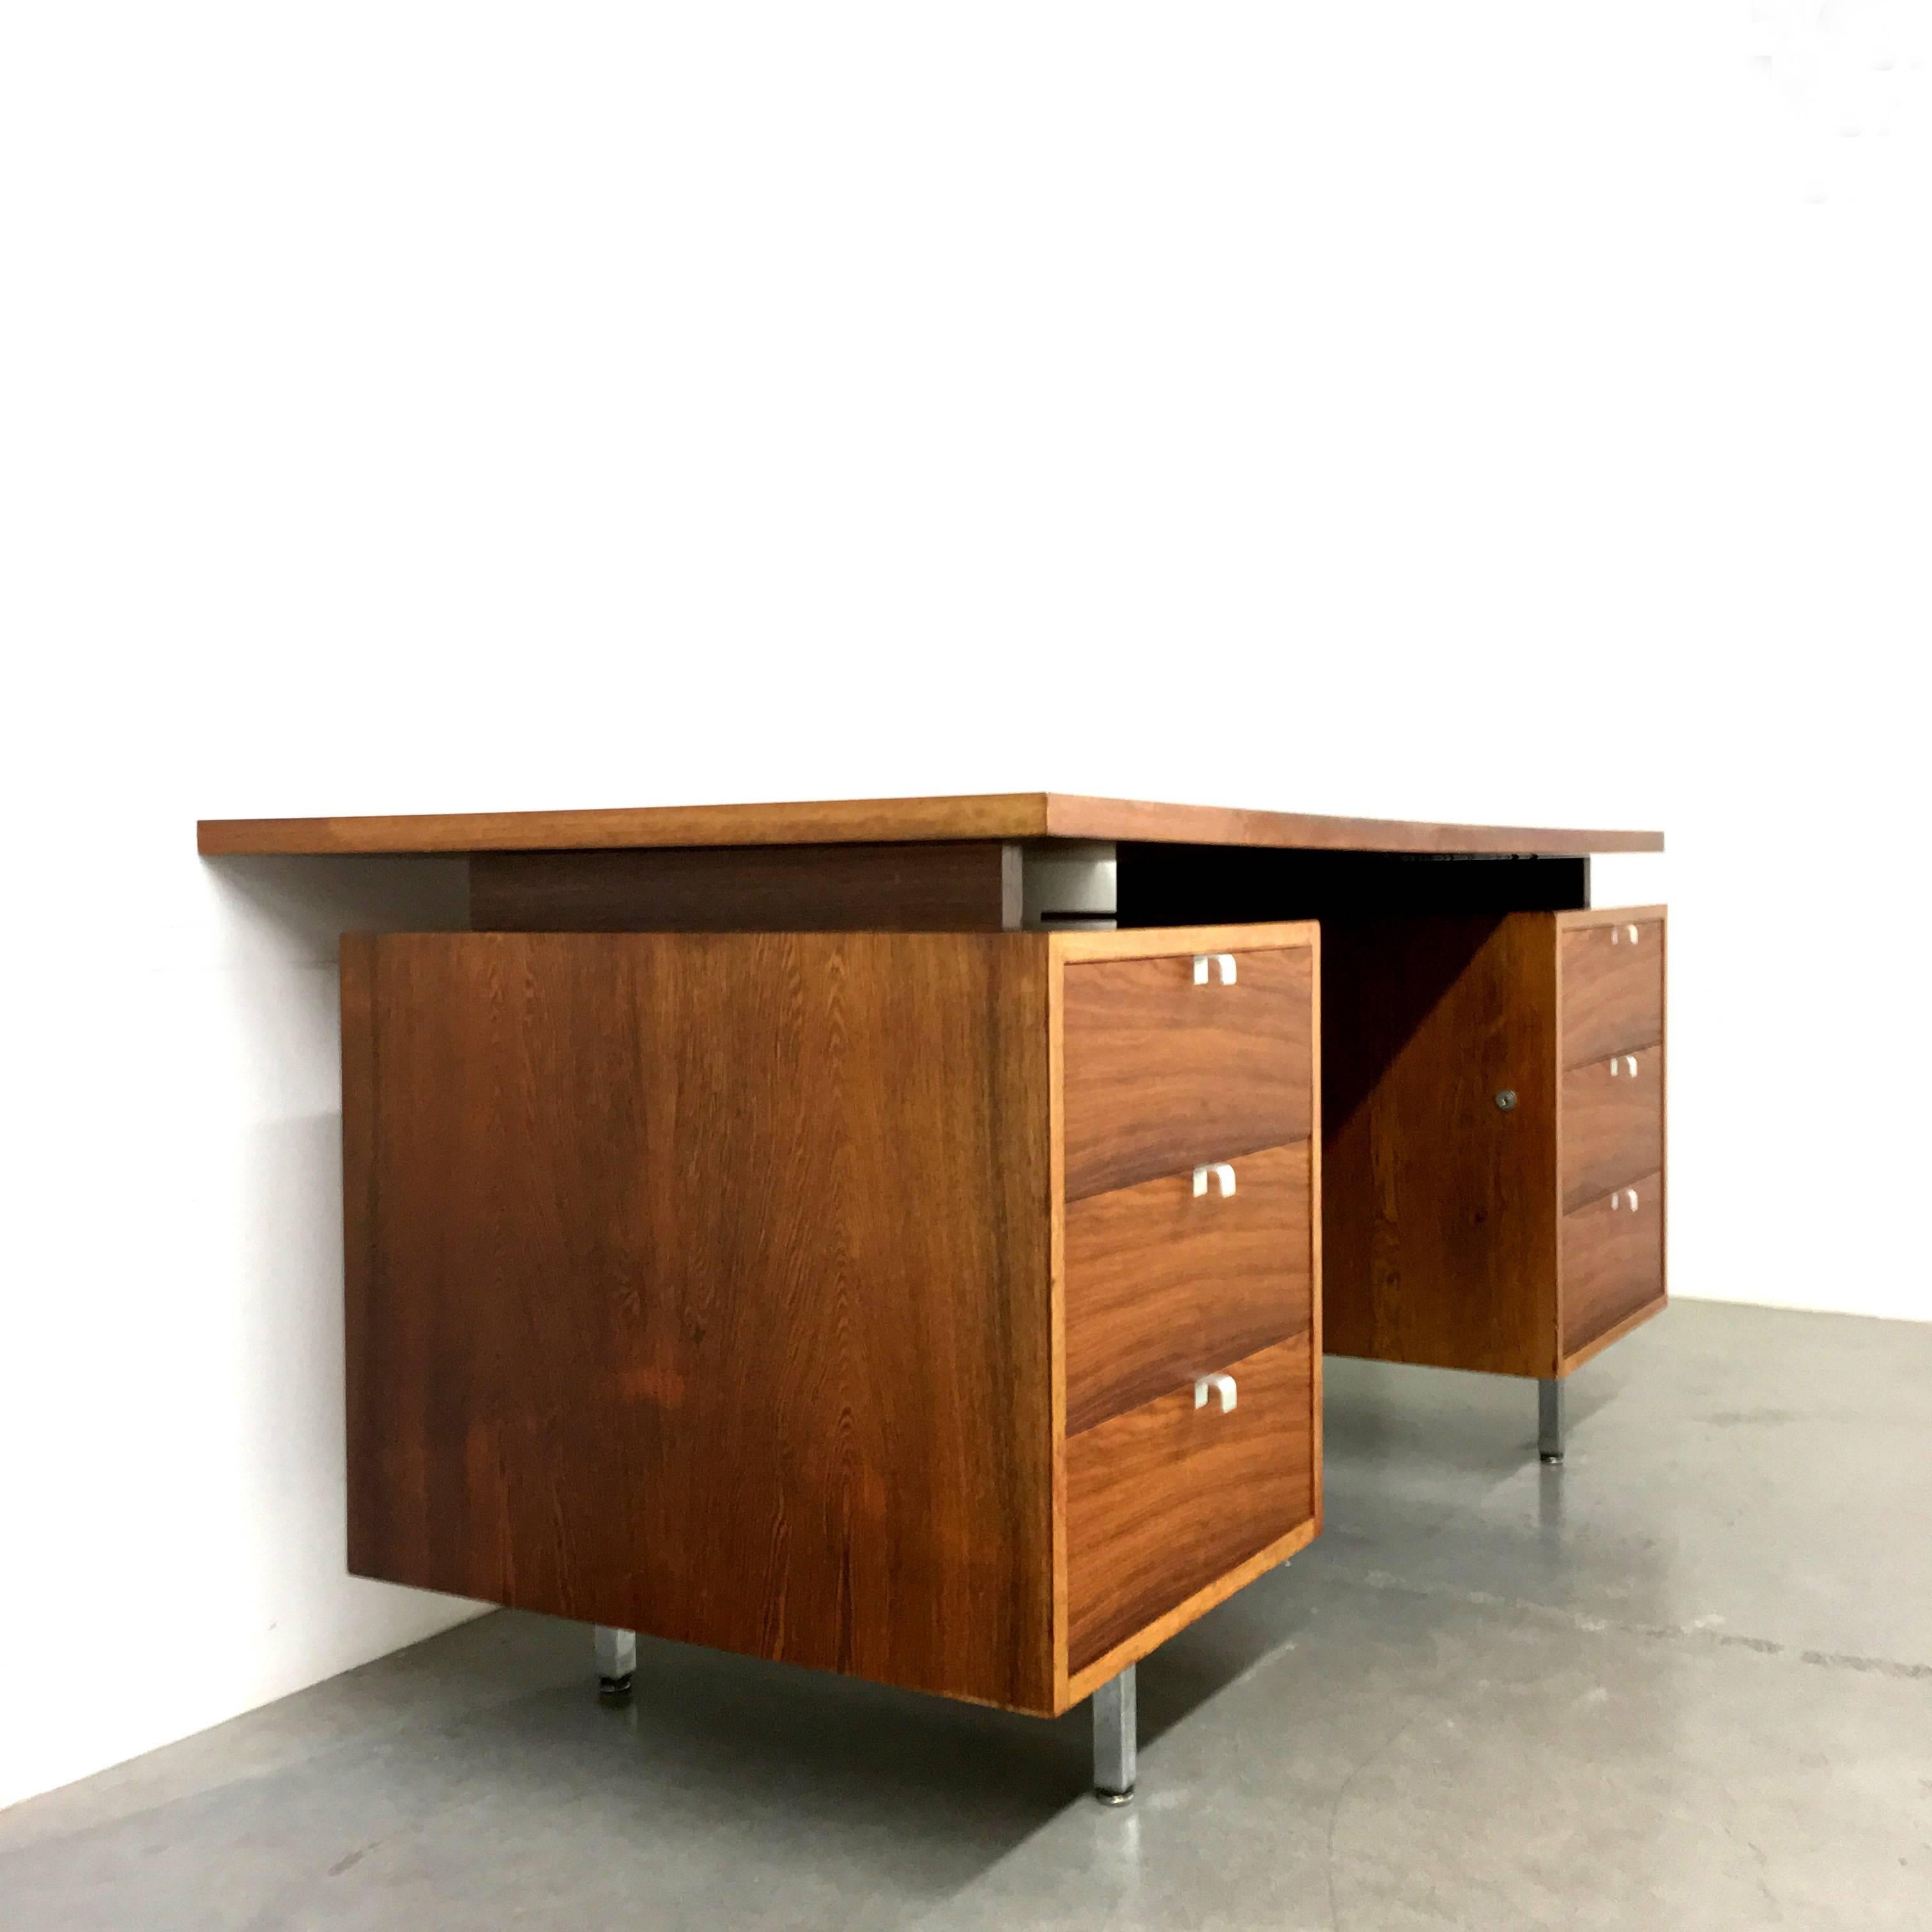 Executive desk, designed in 1960 by George Nelson, manufactured by Herman Miller. Plain-functional design, for that reason extremely beautiful!
The table is made of rosewood. The top is high gloss varnished, the drawer boxes are semi-mat.